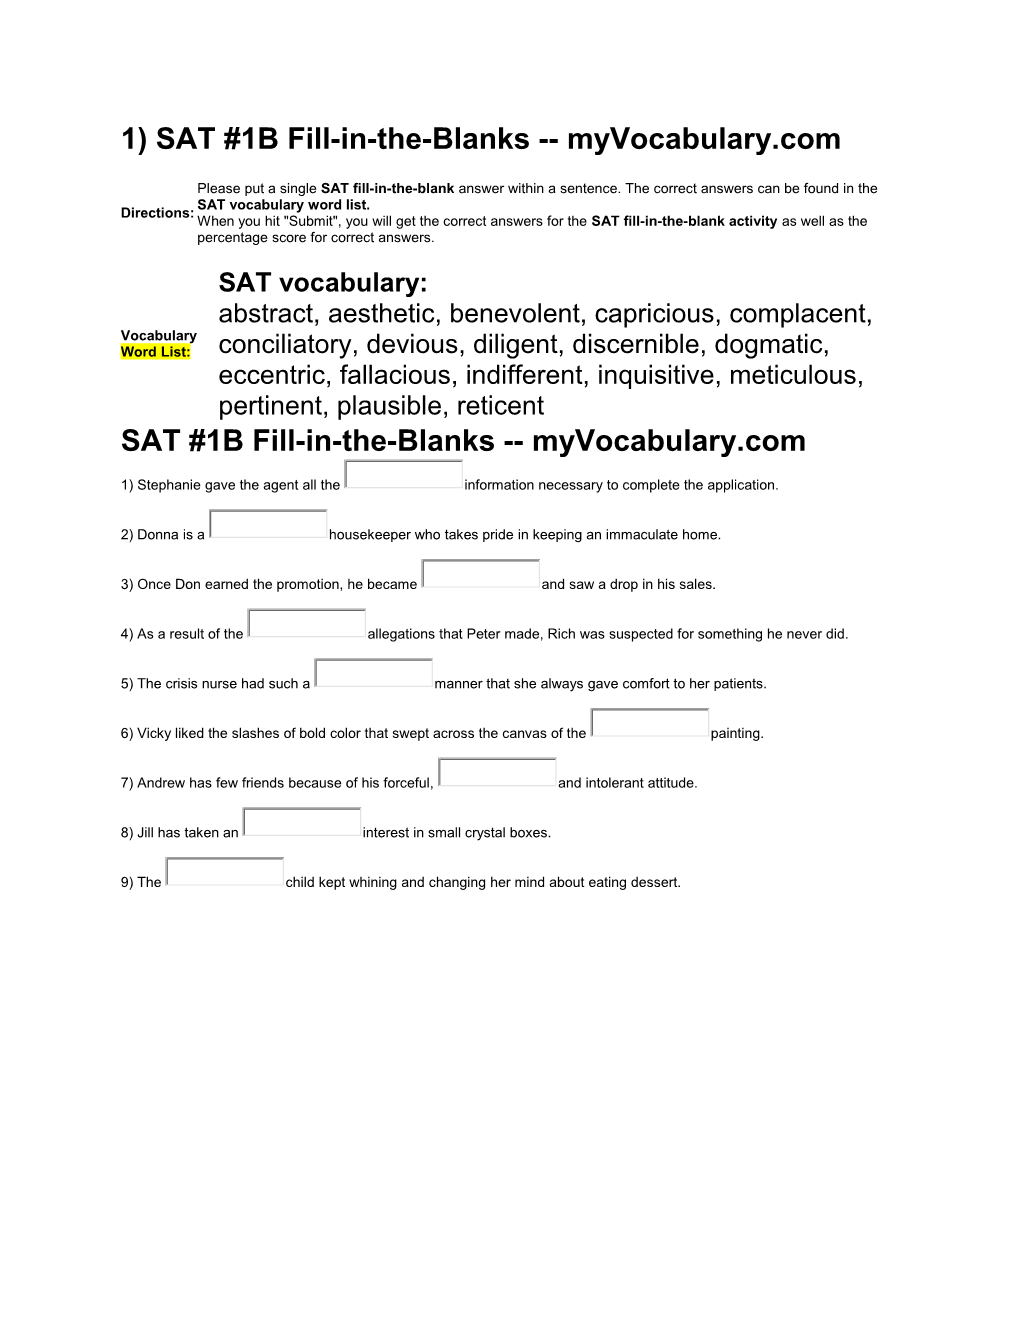 1) SAT #1B Fill-In-The-Blanks Myvocabulary.Com